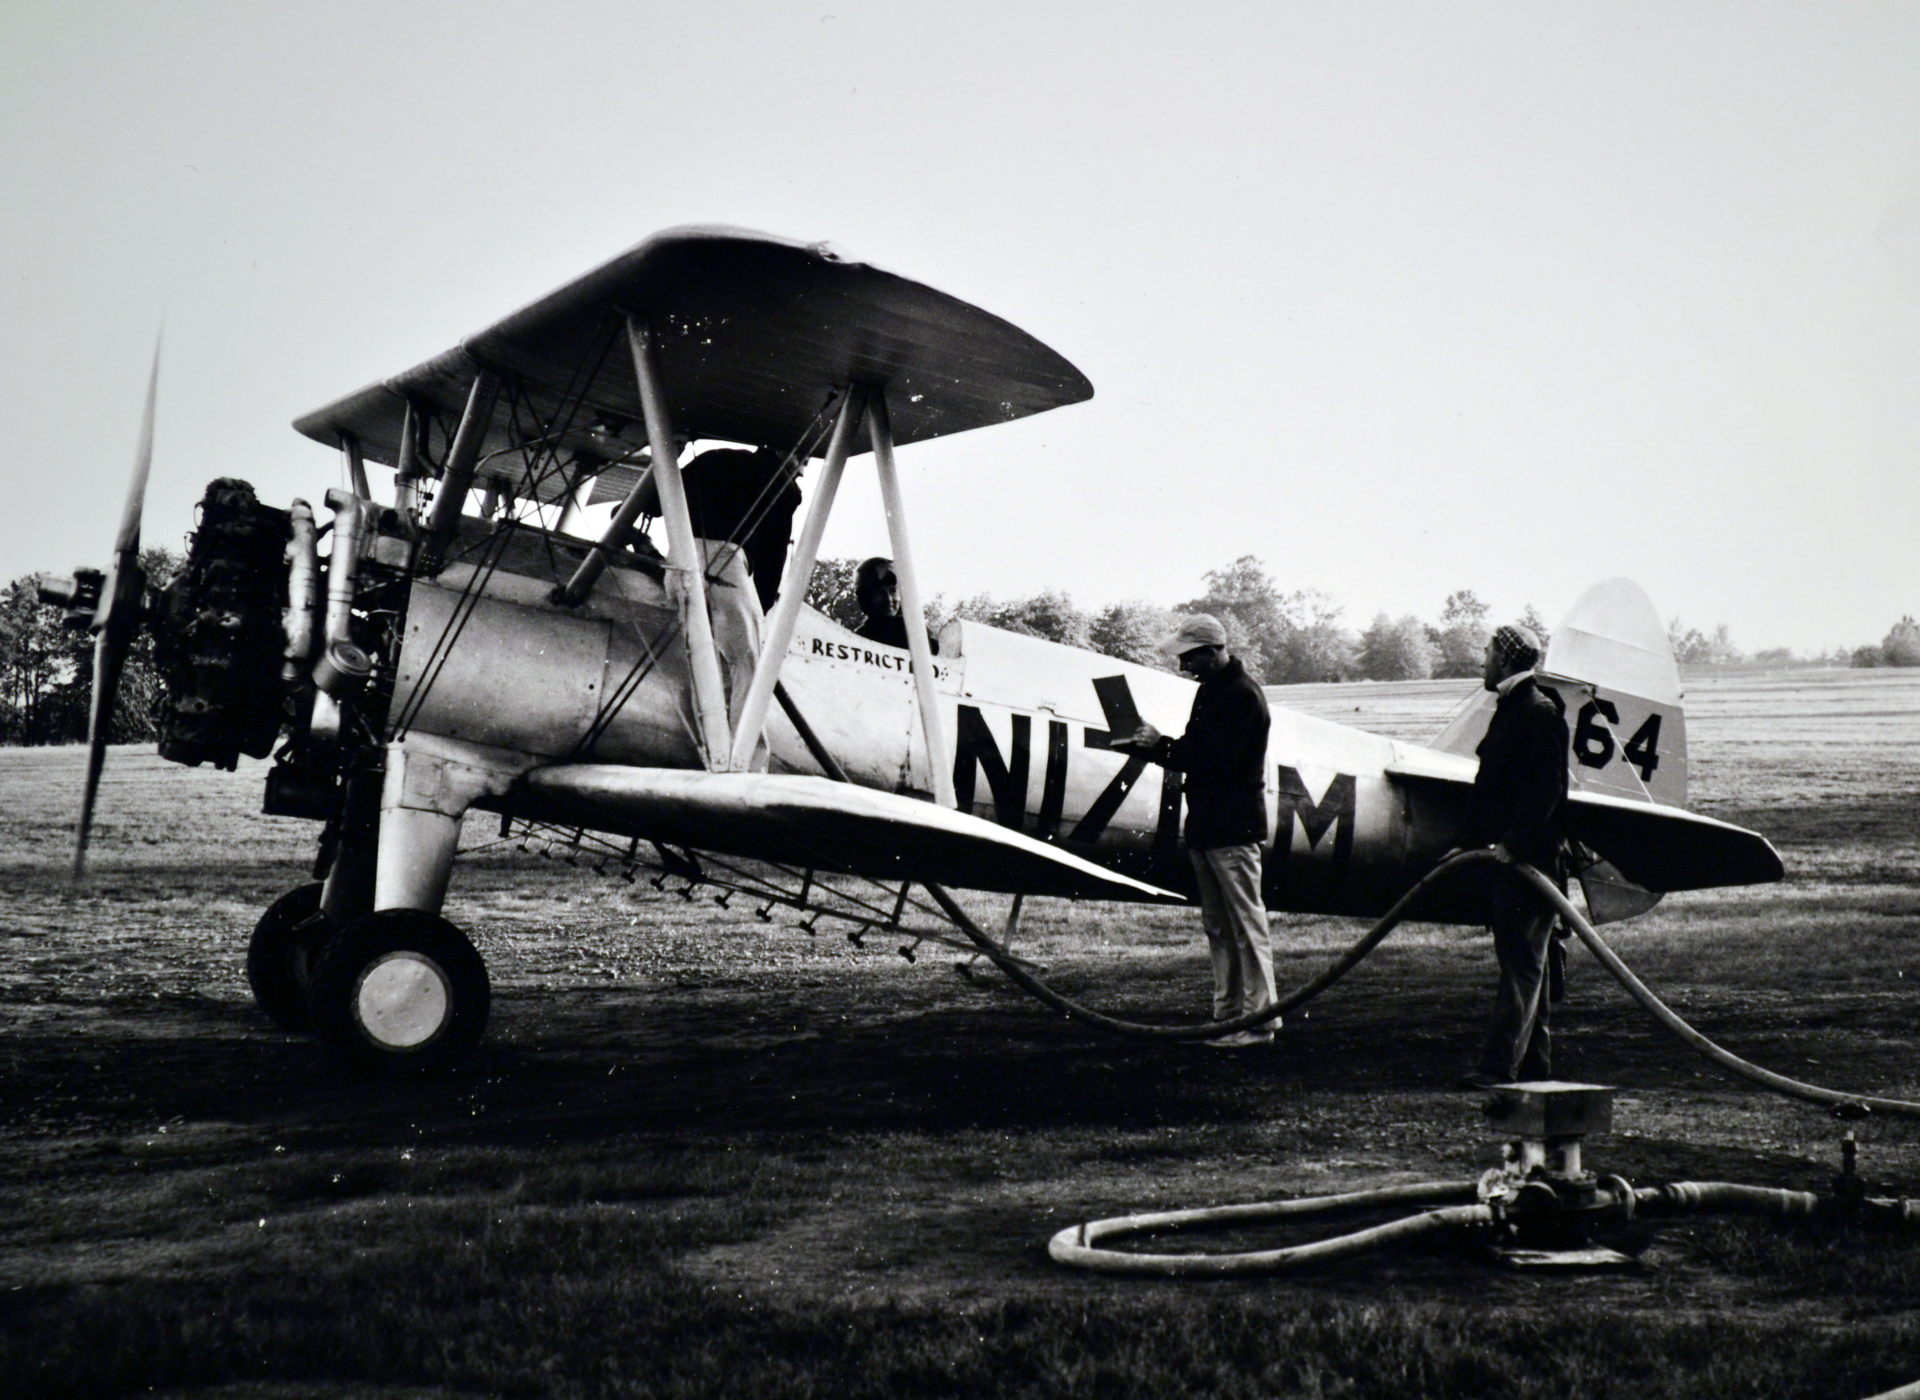 Stearman primary trainer takes on a job as a sturdy, stable, and relatively inexpensive crop duster